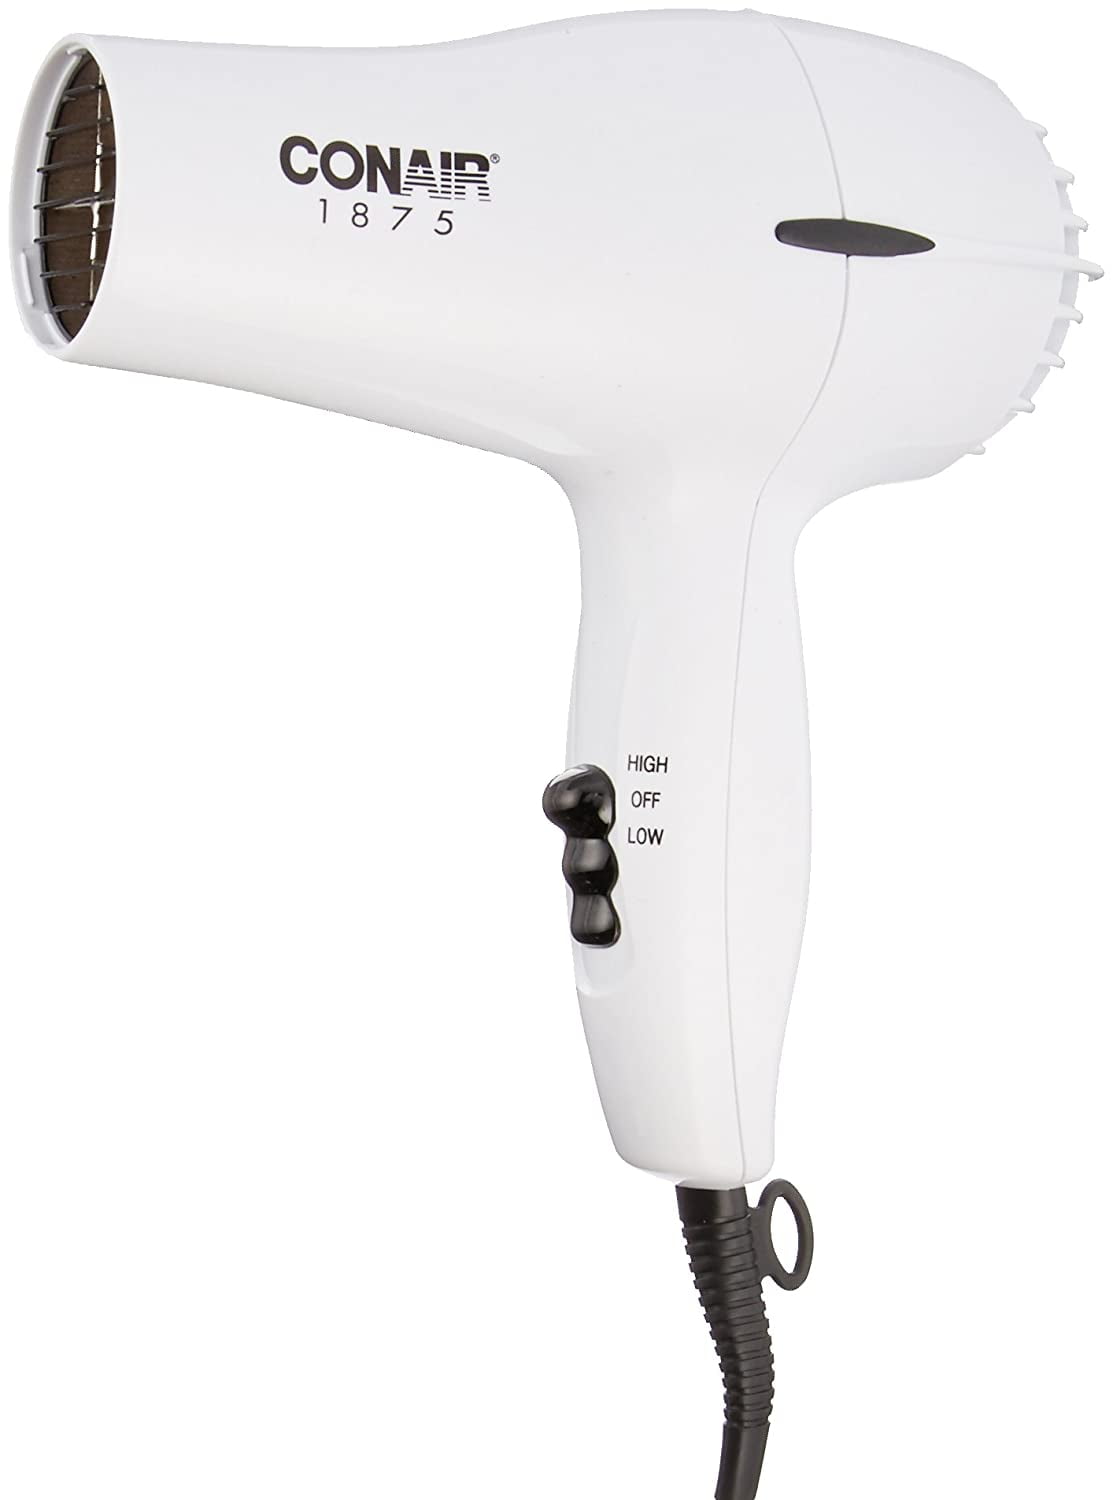 Conair 1875 Watt Mid-Size Dryer for Powerful Drying and Styling -  